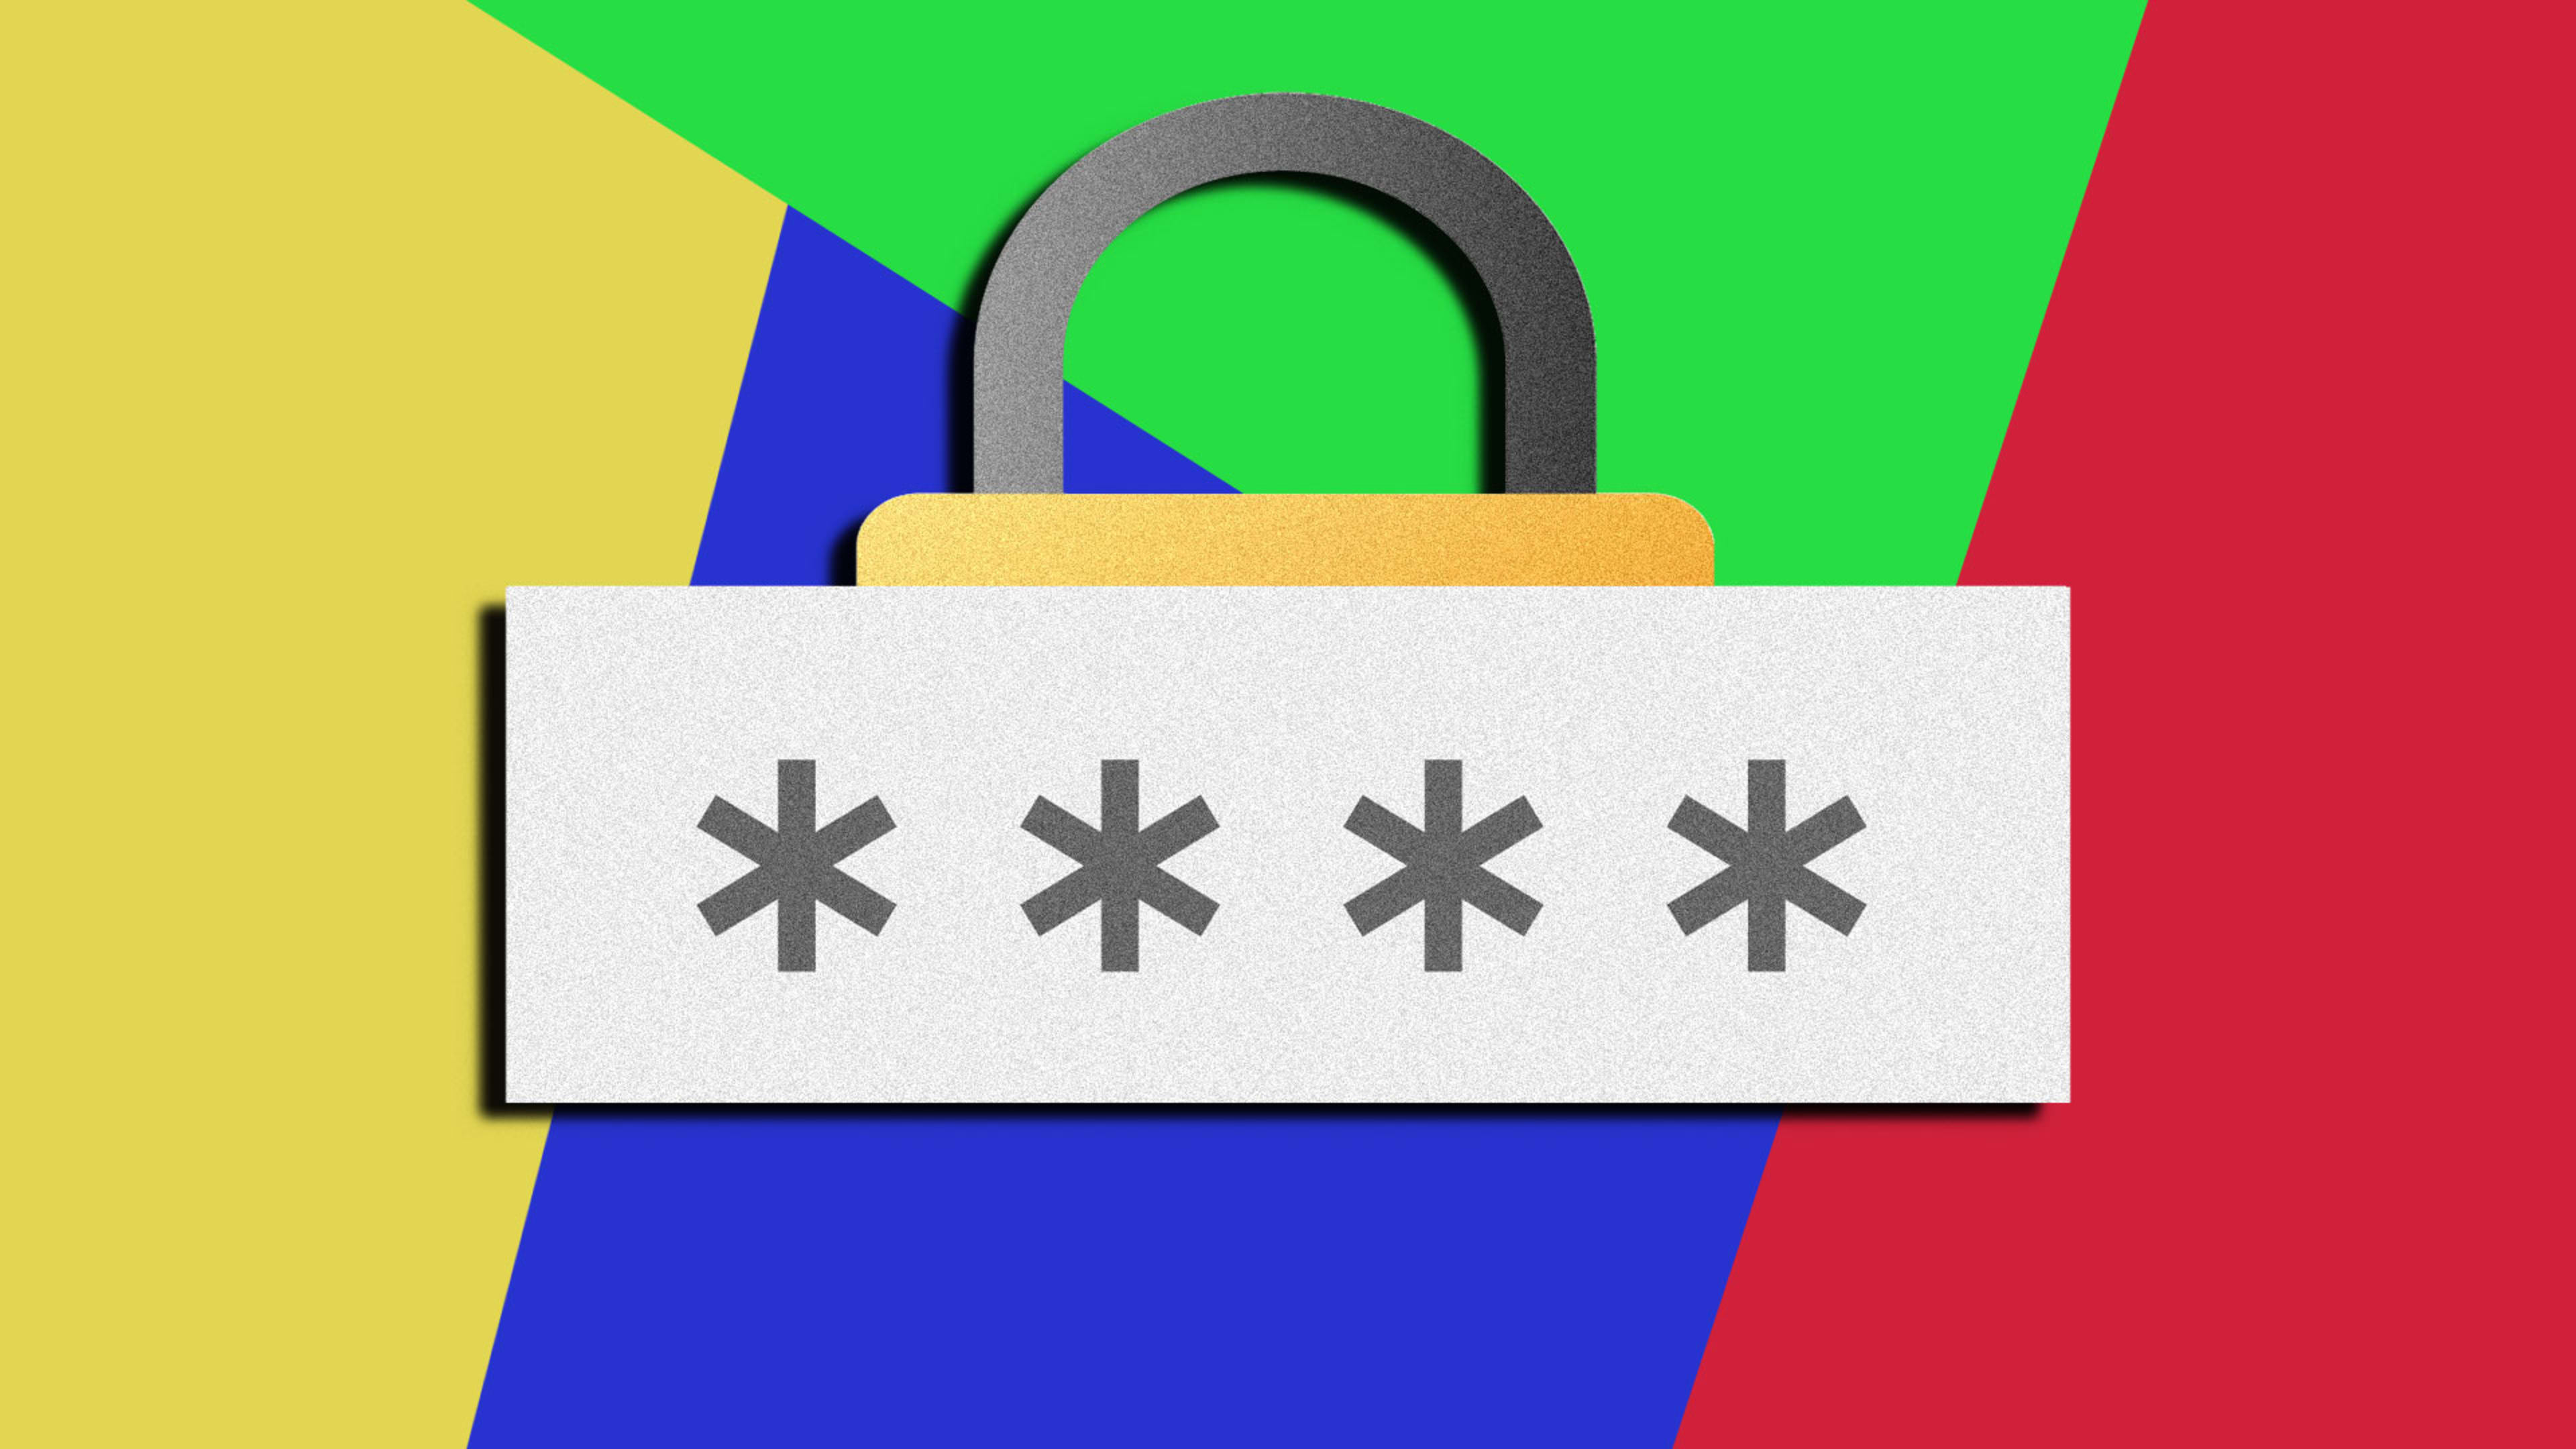 Google’s hidden security defaults are shockingly powerful